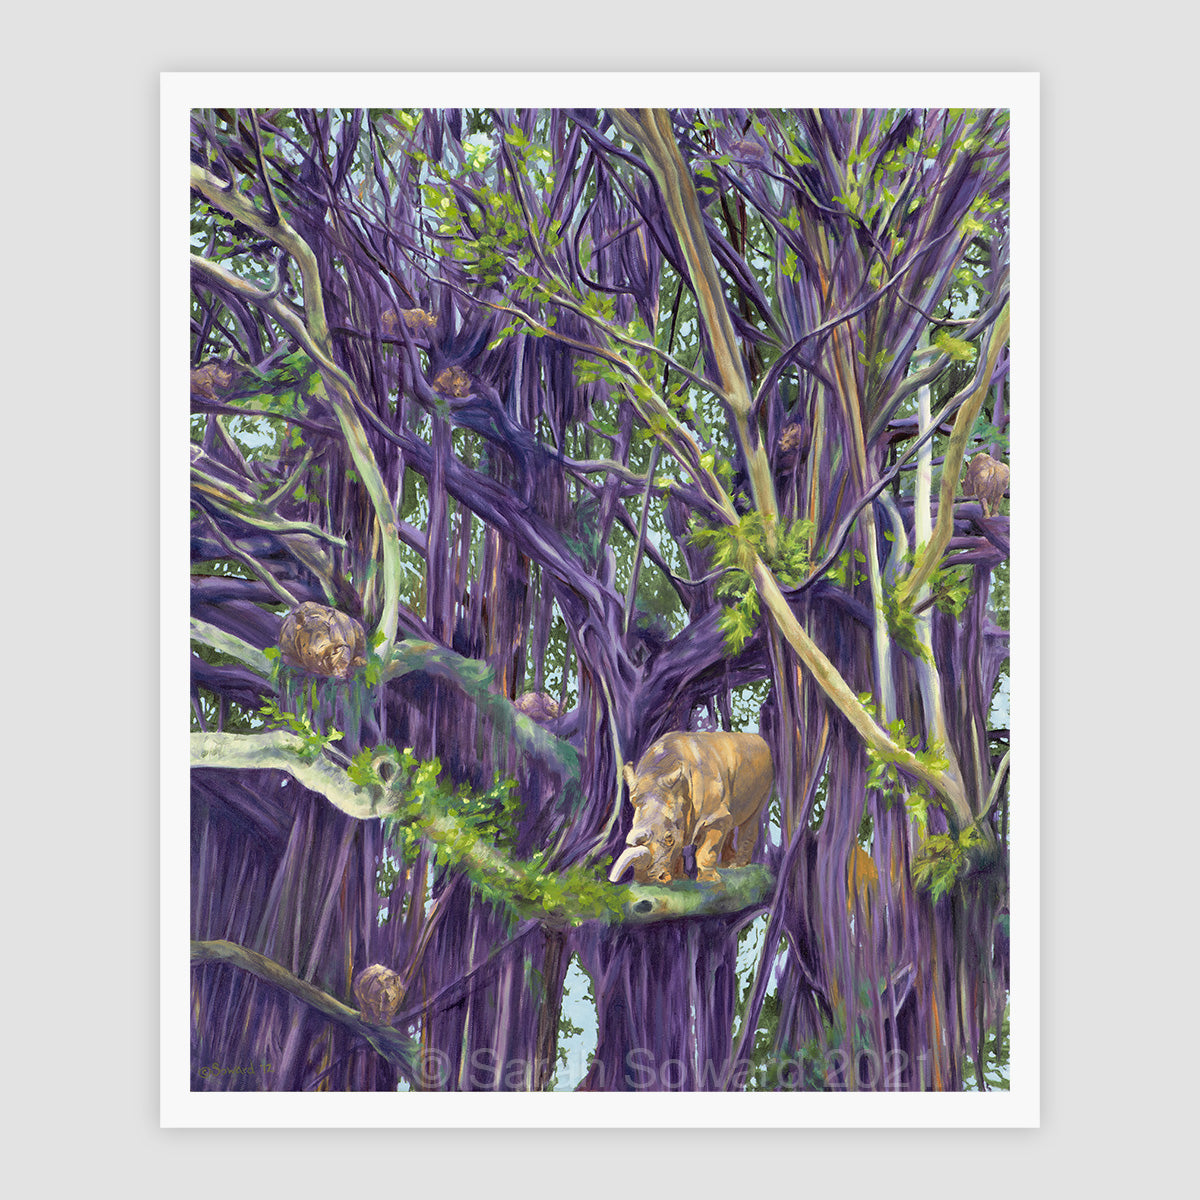 Secluded Spaces, Open Edition Print